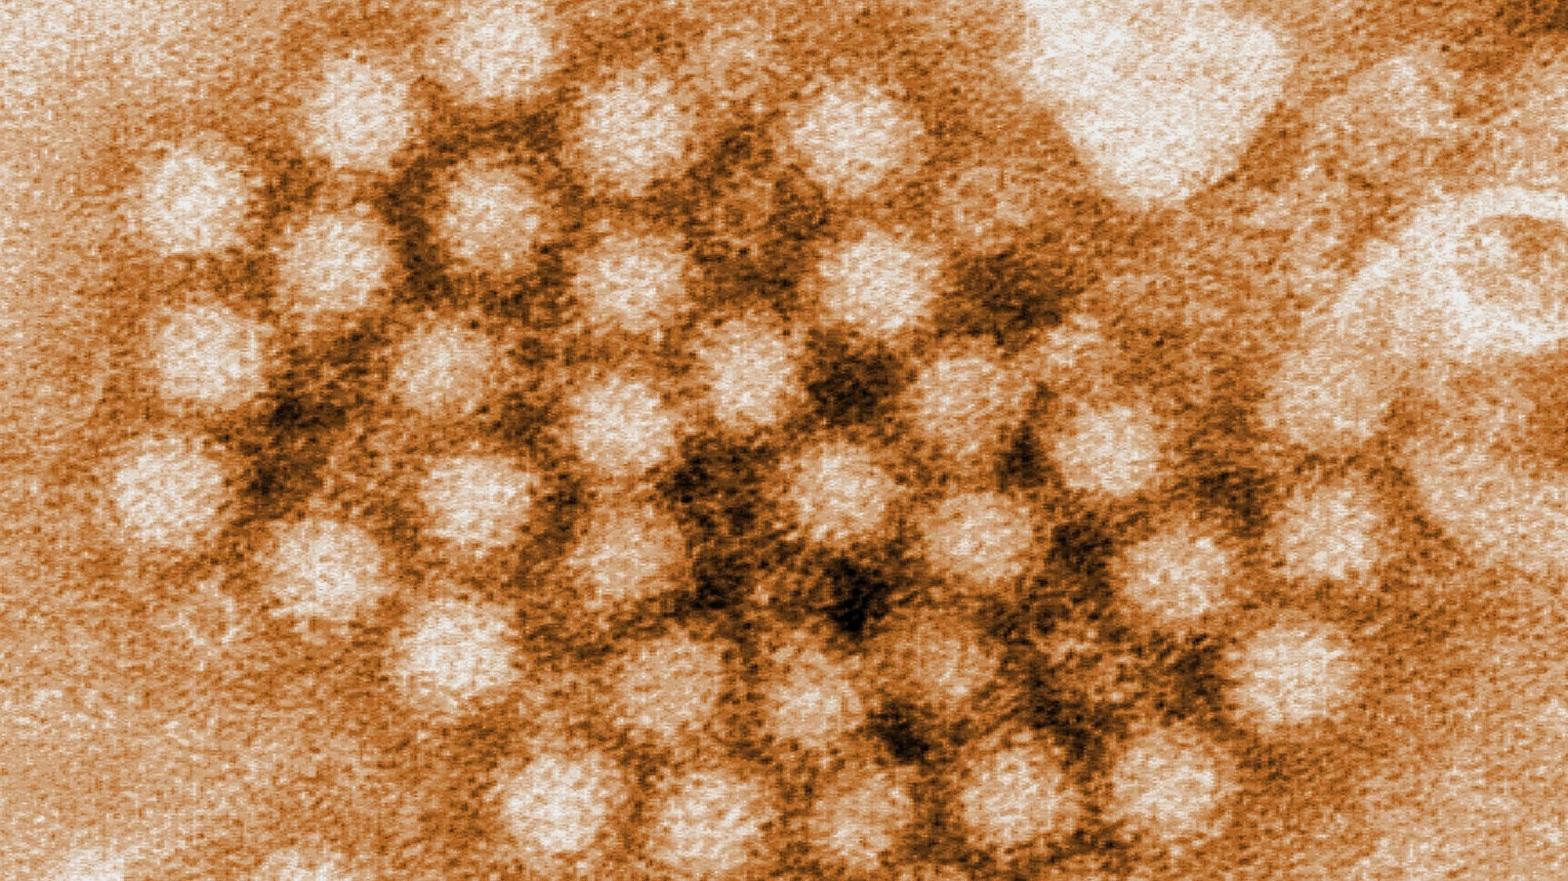 A digitally-colorized, transmission electron microscopic (TEM) image of individual norovirus particles (Image: CDC/ Charles D. Humphrey)